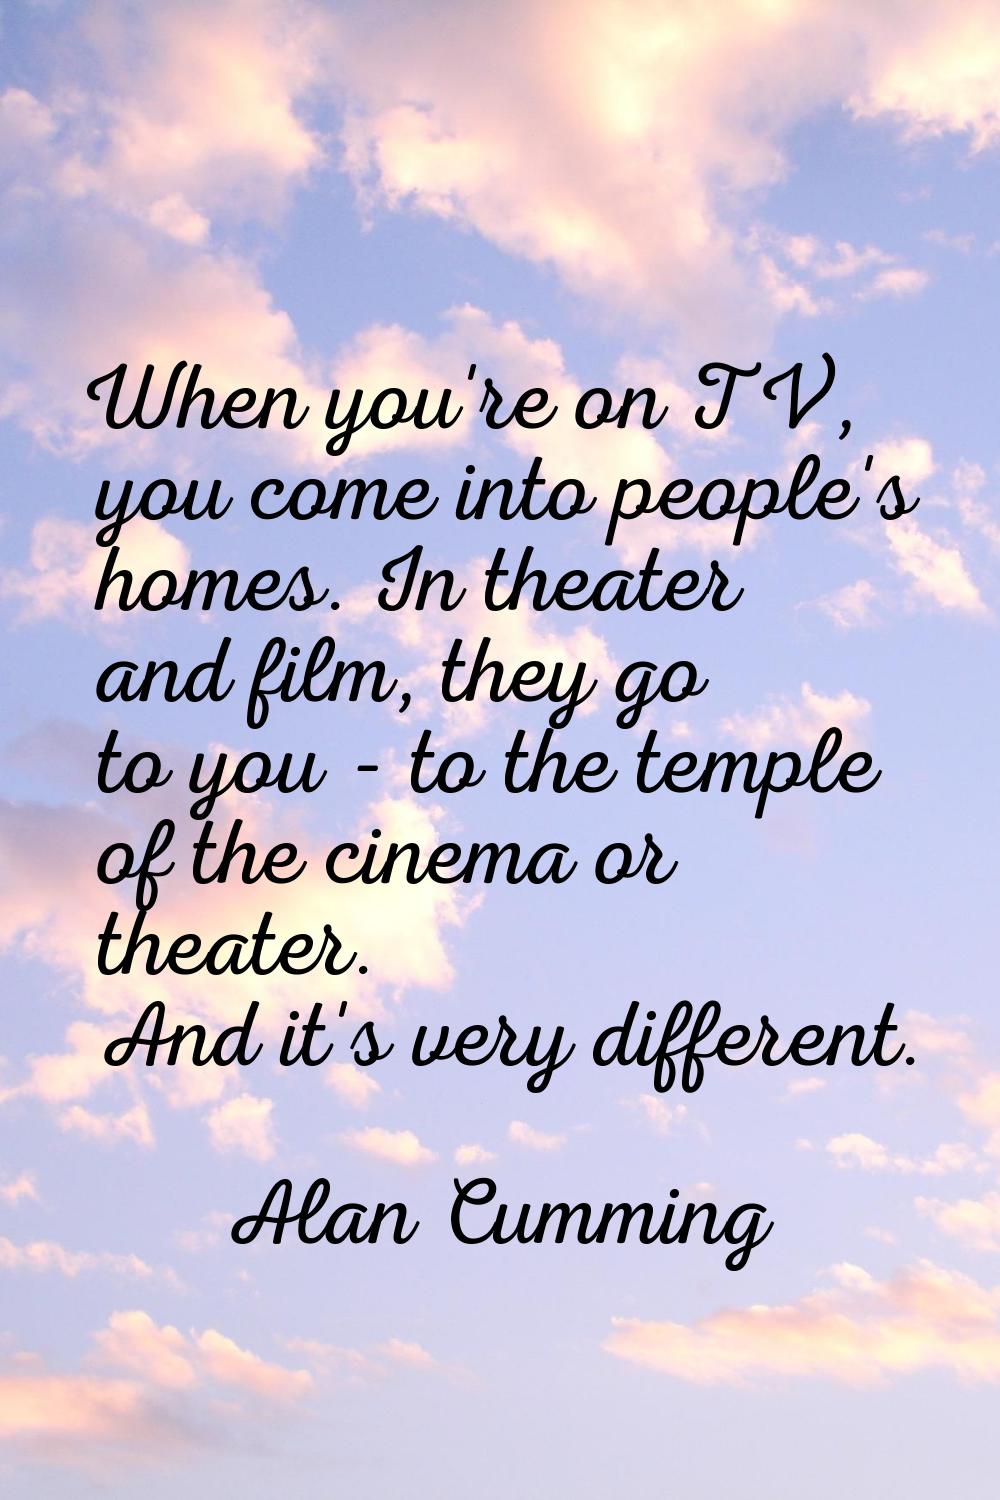 When you're on TV, you come into people's homes. In theater and film, they go to you - to the templ